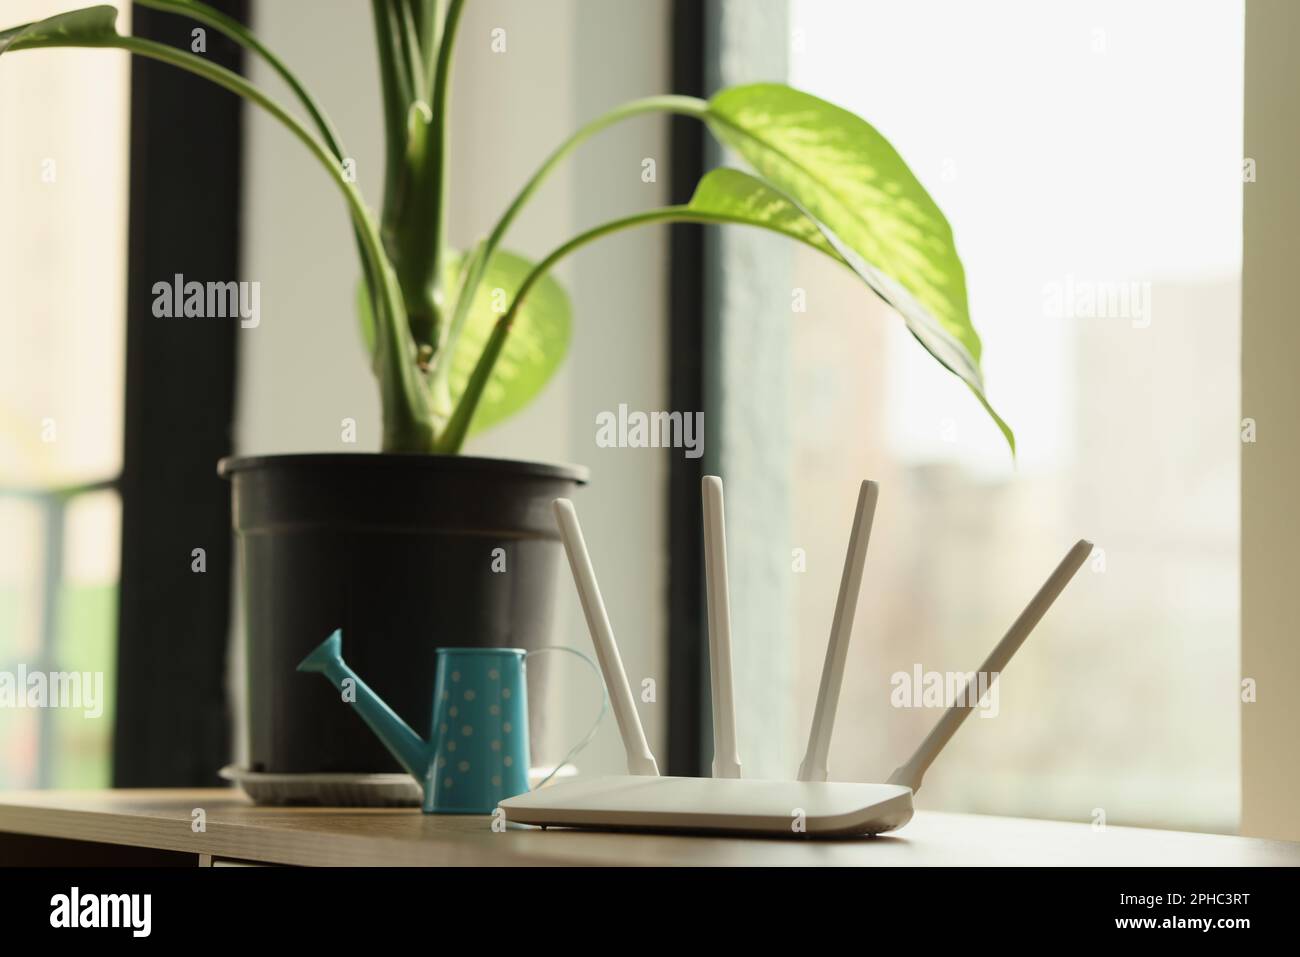 Wi-Fi router stands on table near pot-plant with big leaves Stock Photo